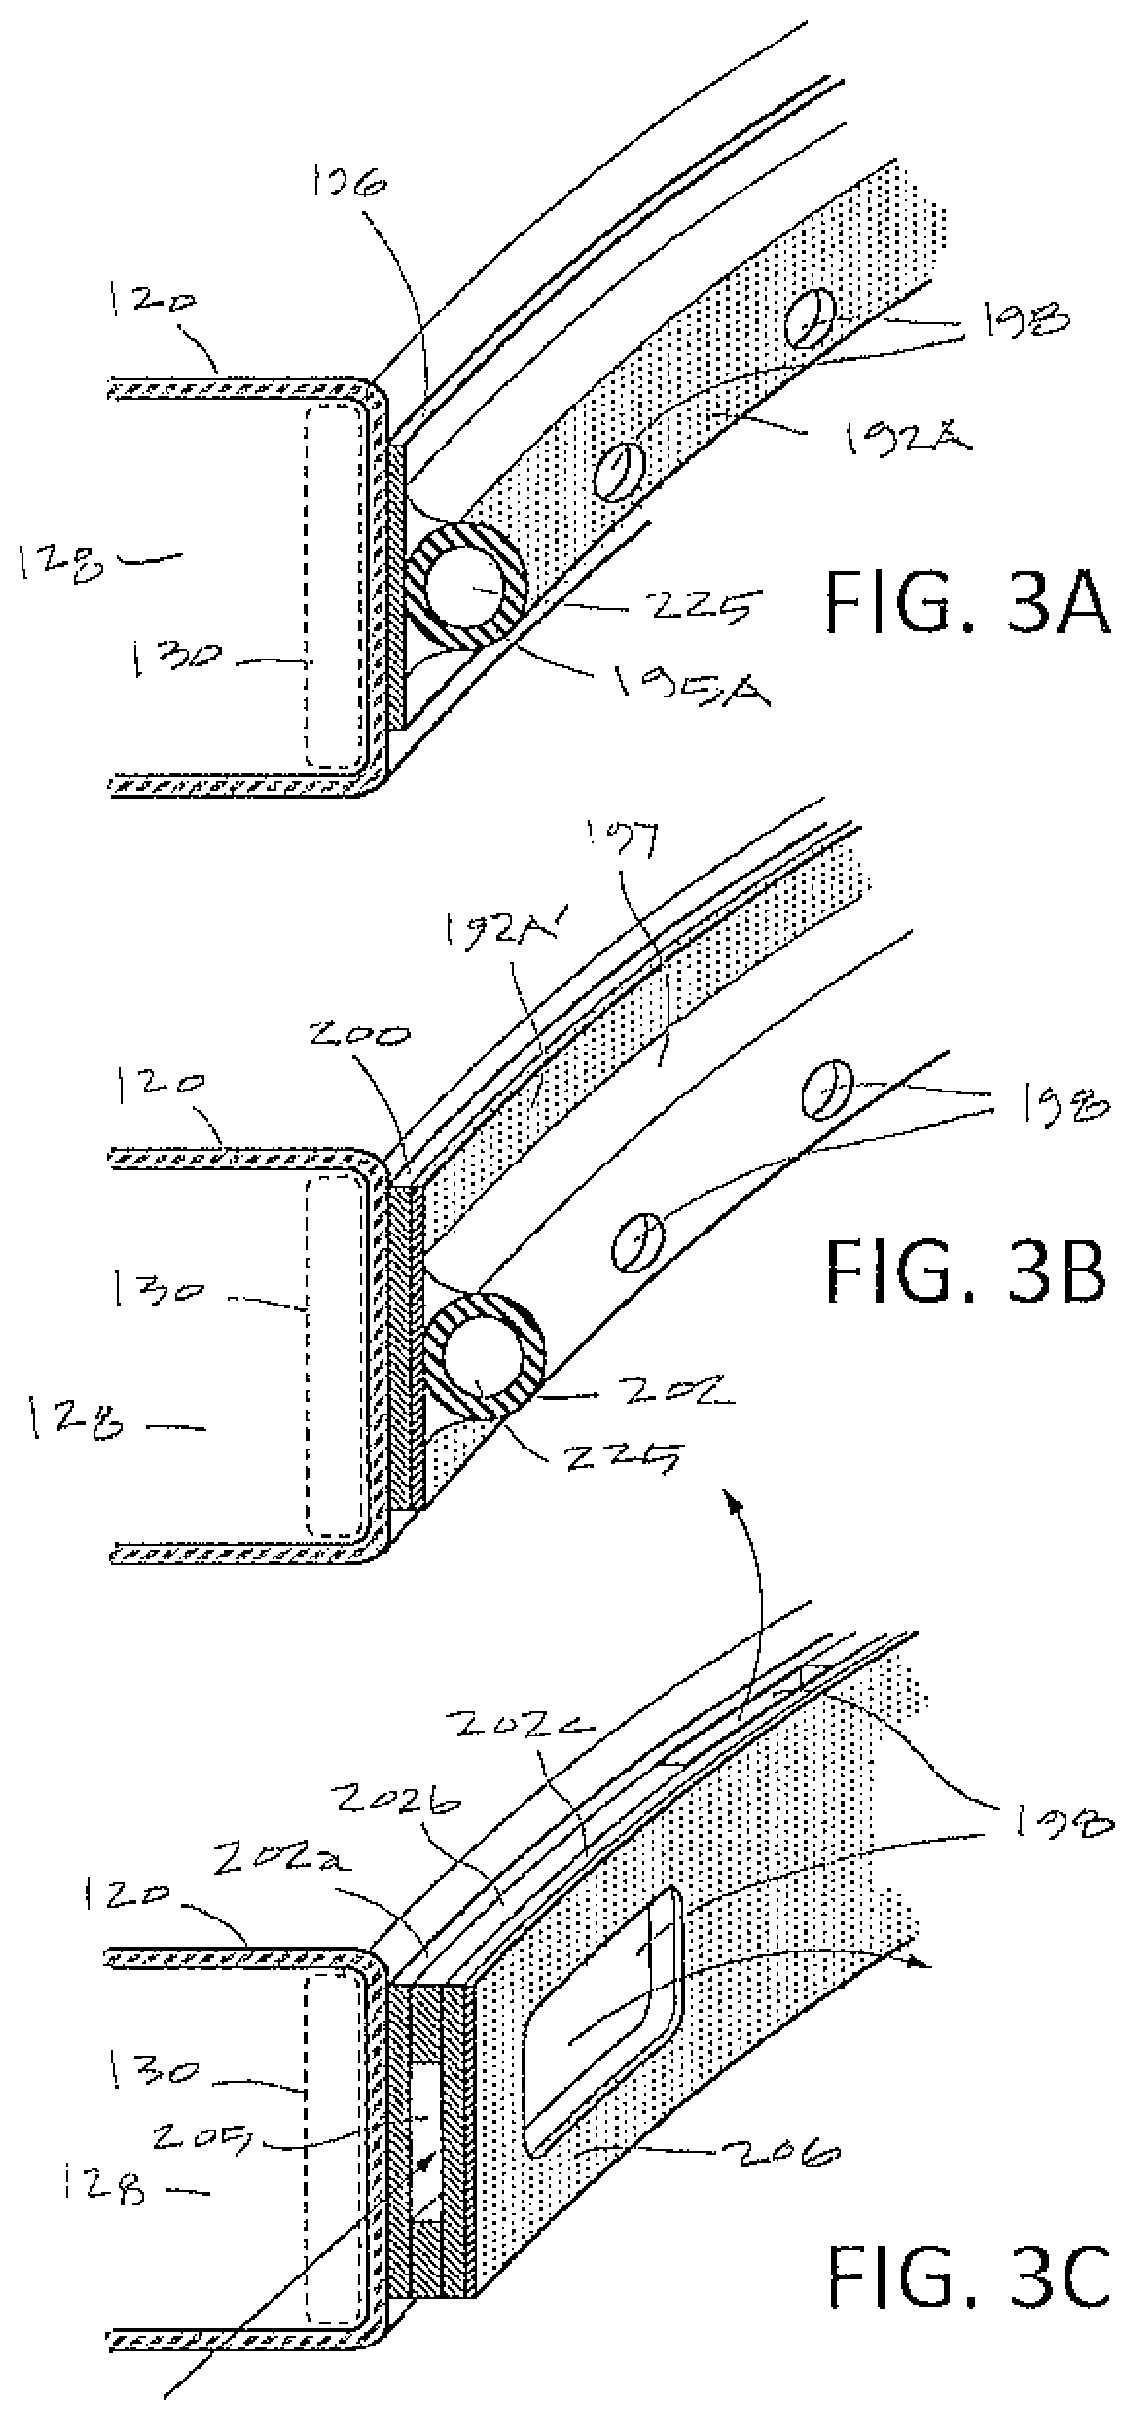 Systems and methods for evaluating the integrity of a uterine cavity